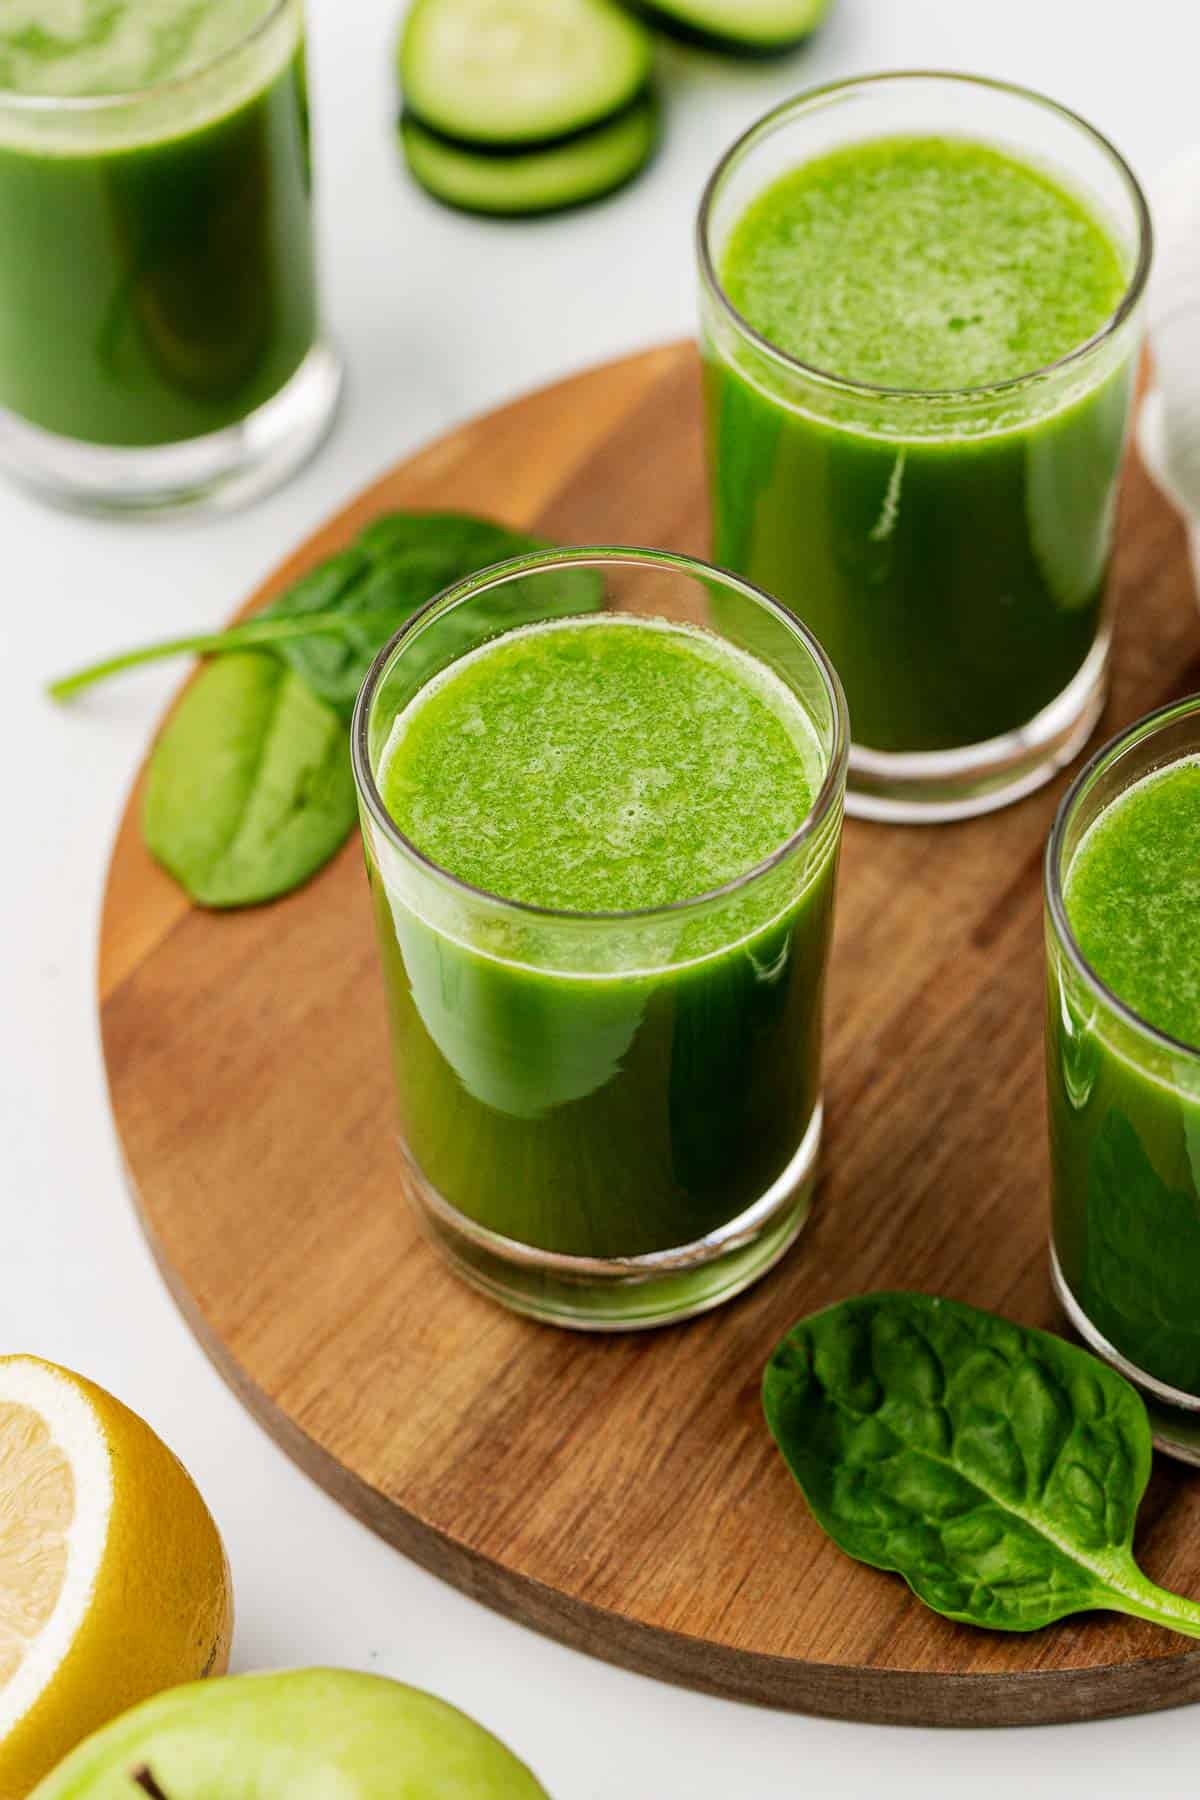 spinach juice in a glass on a wooden cutting board